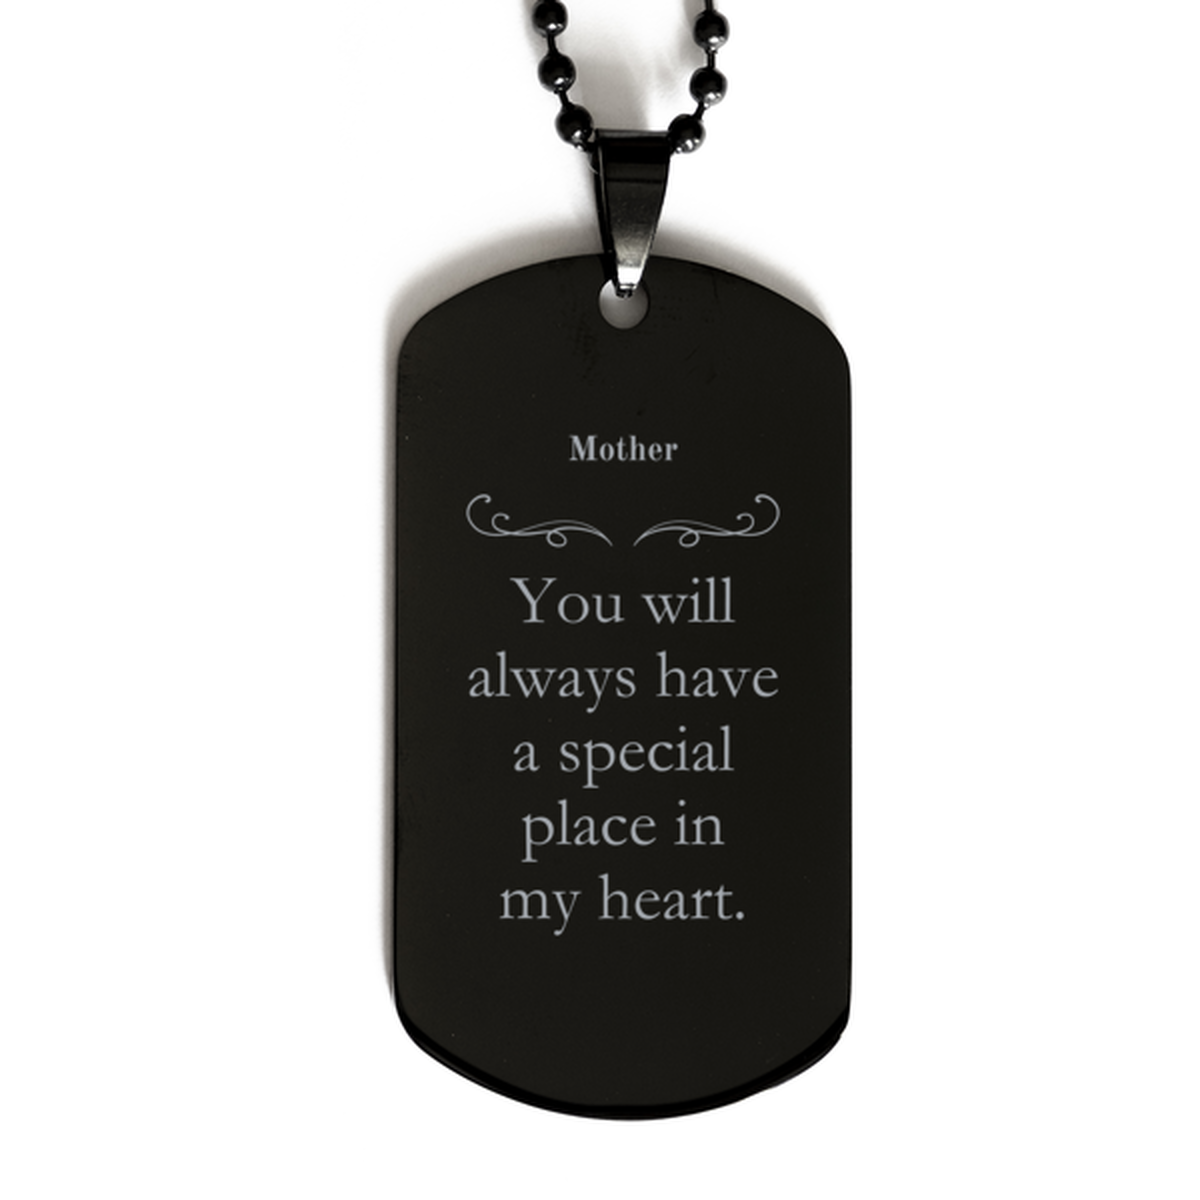 Mother Black Dog Tag Engraved Special Place Heart Love Gift for Her